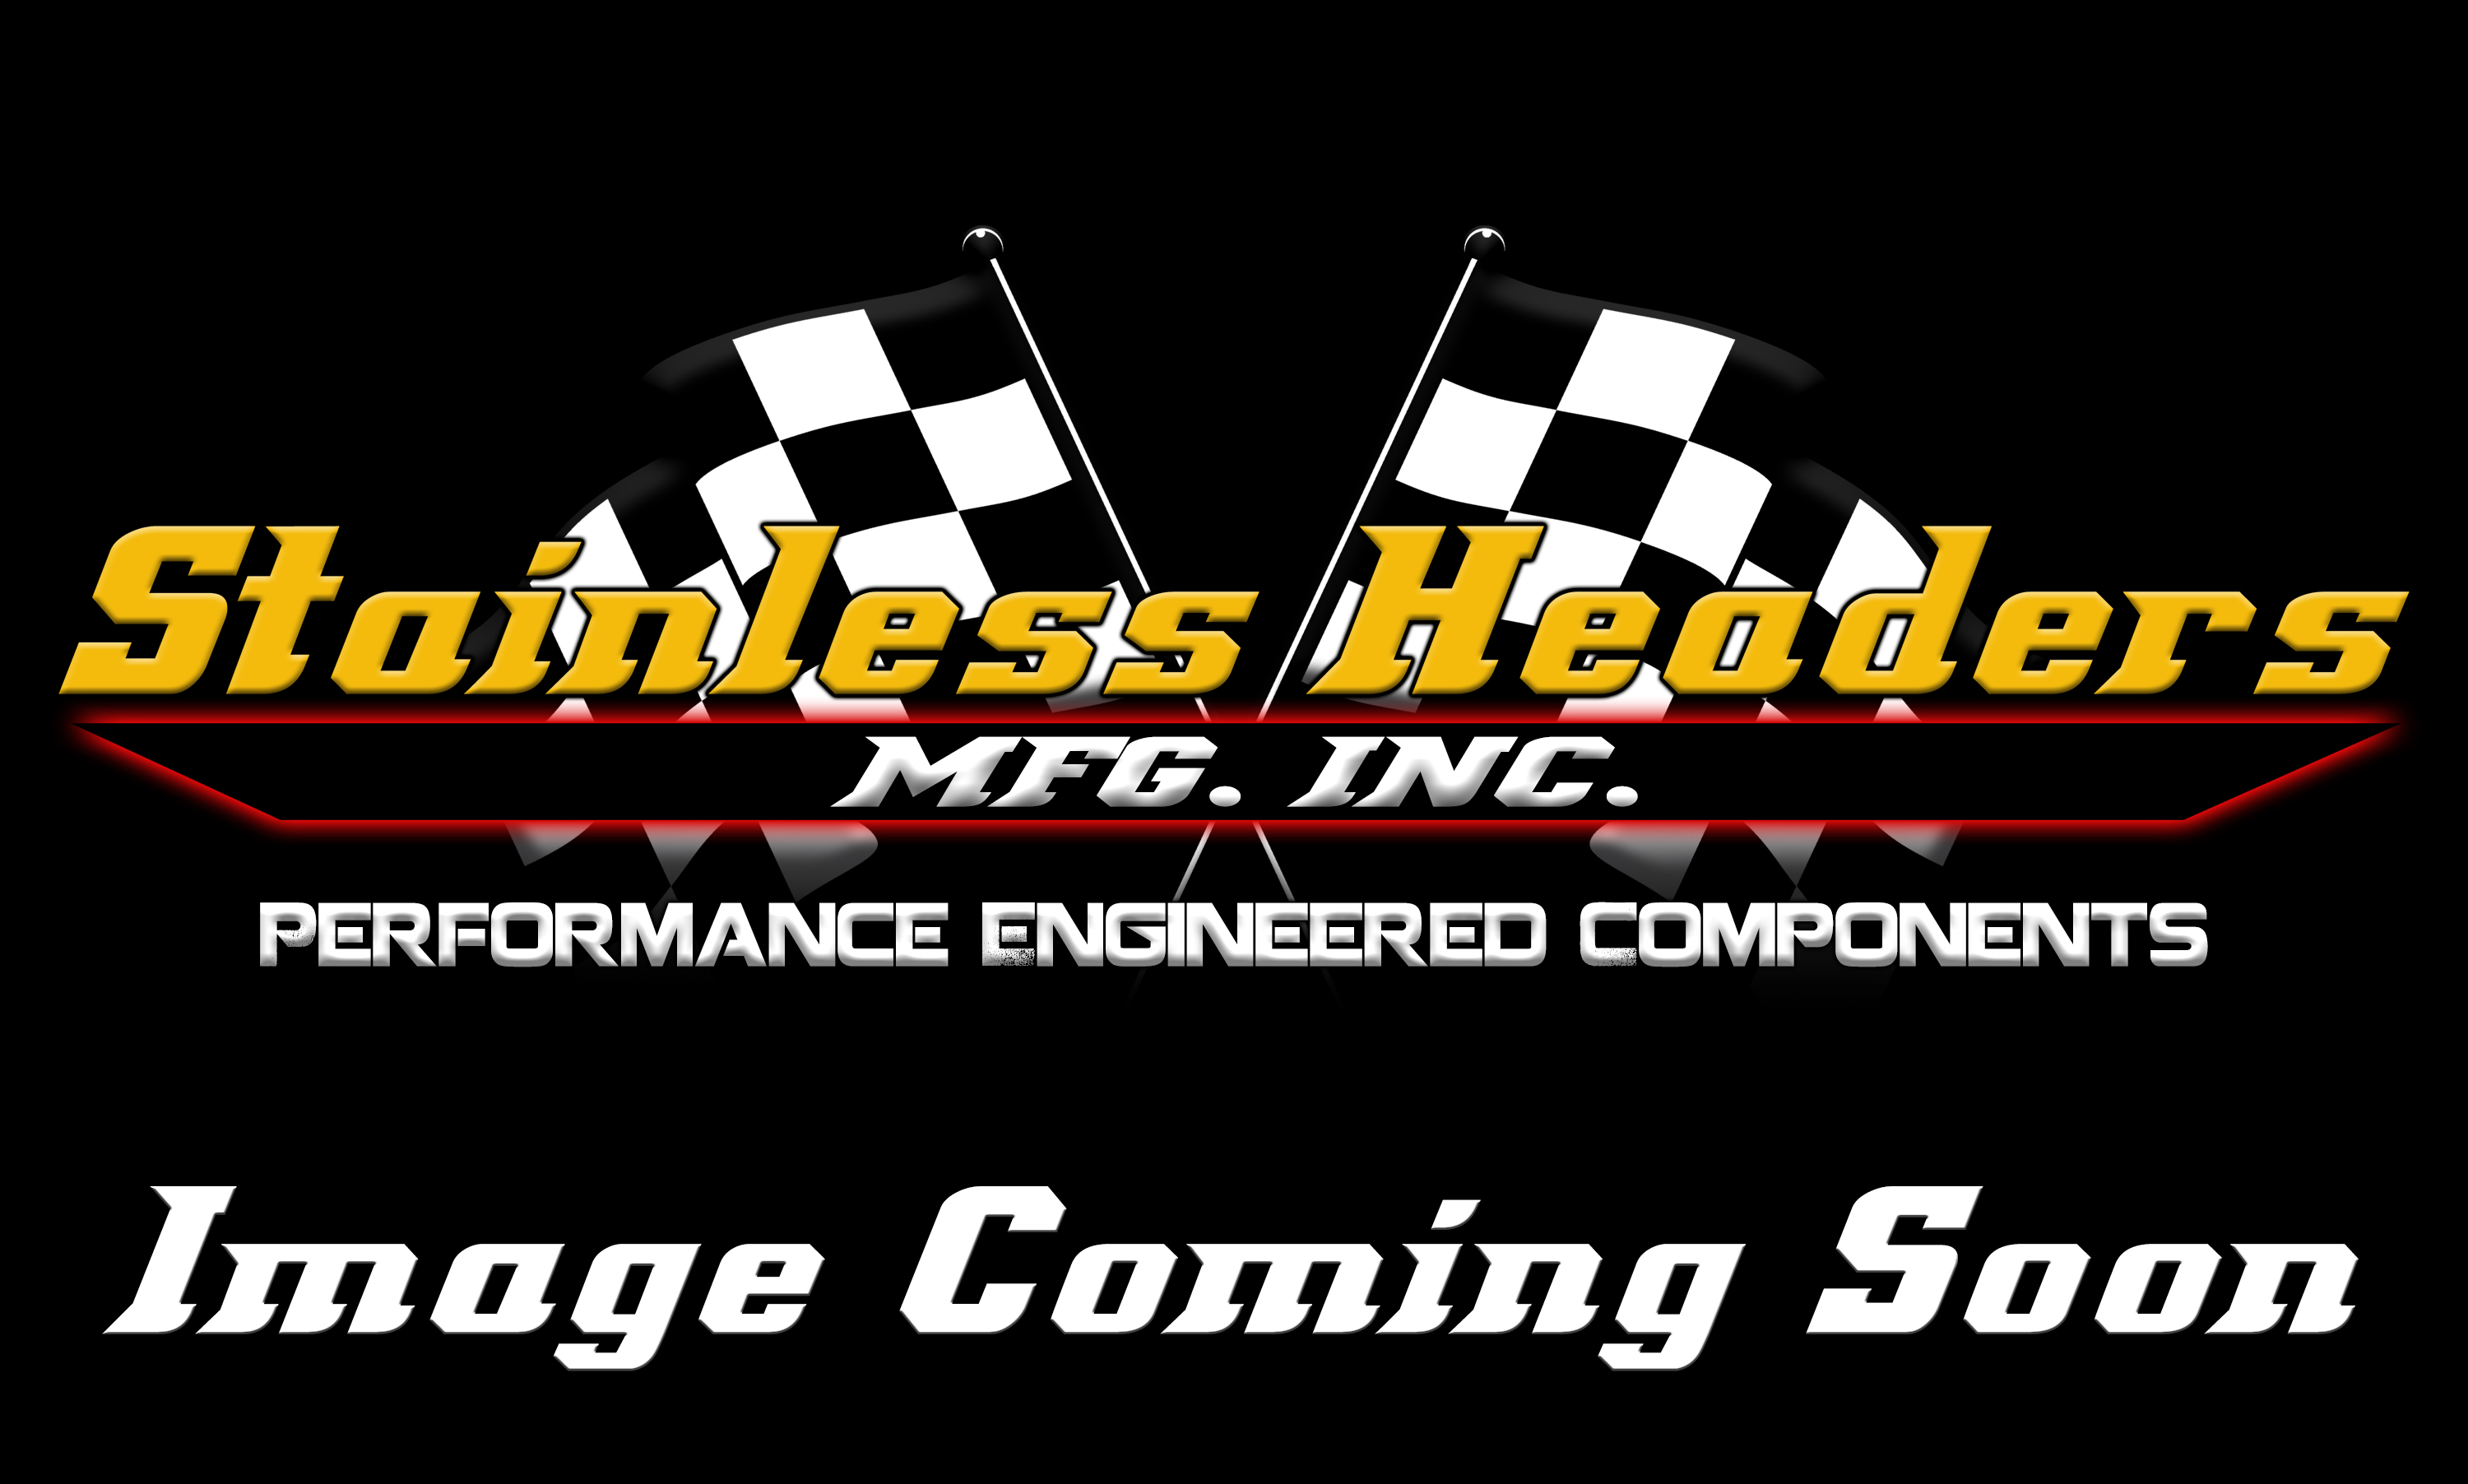 Stainless Headers - 2" Primary 3 into 1 Performance Merge Collector-18ga 321ss - Image 2